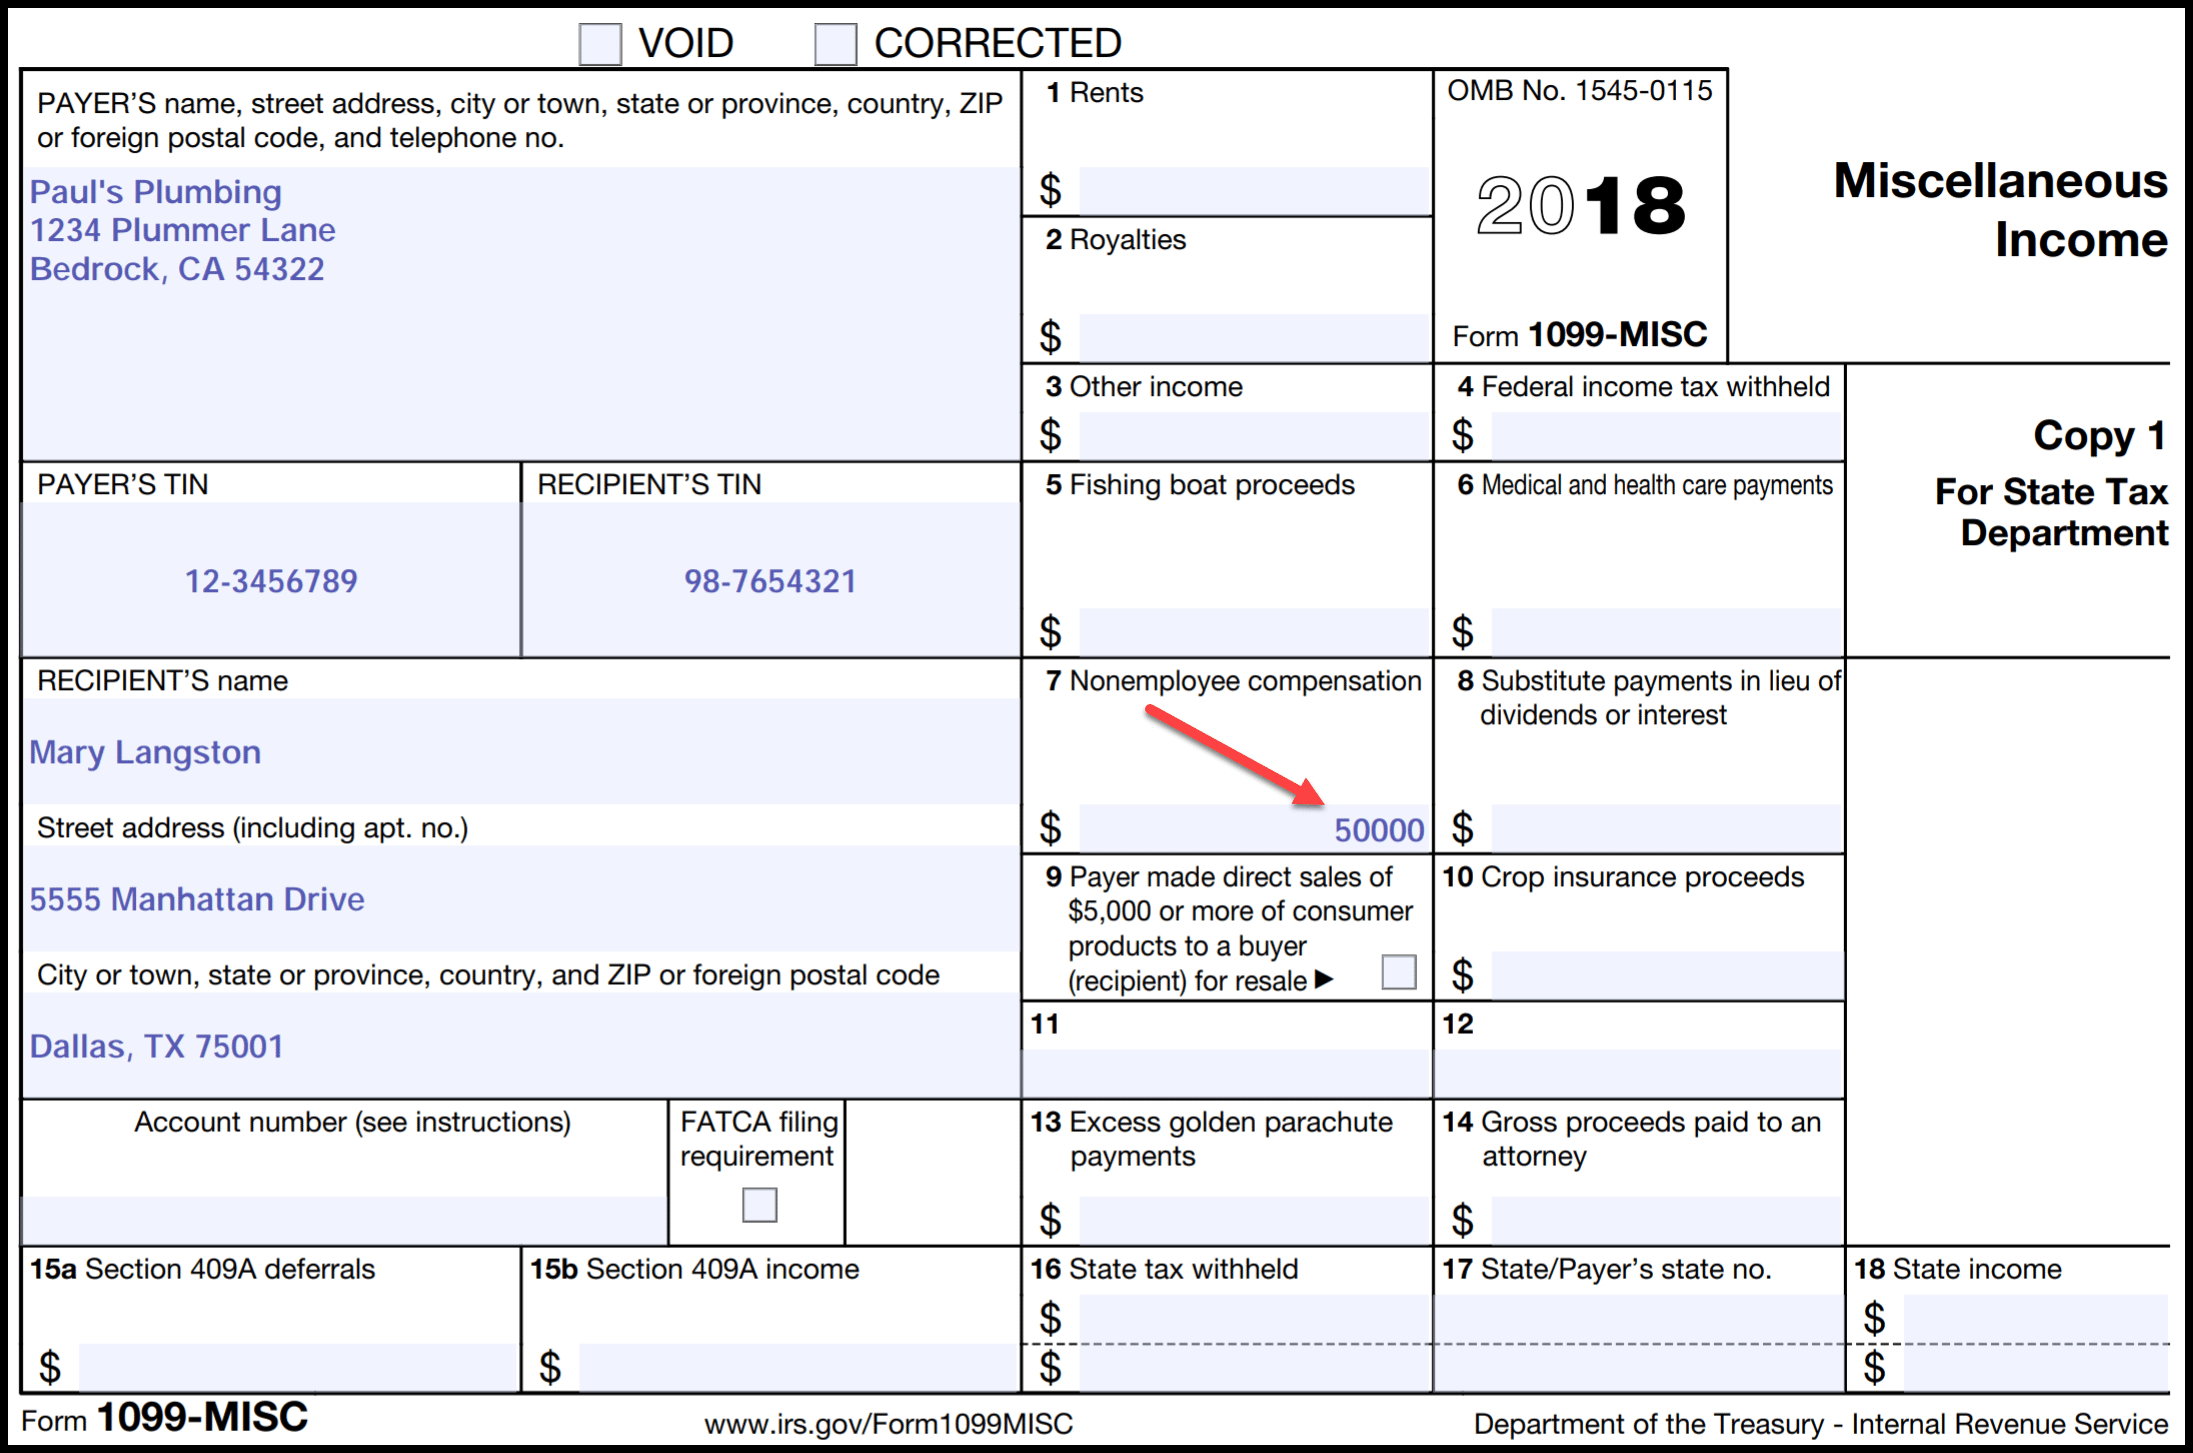 Irs Form 1099 Reporting For Small Business Owners - Free Printable 1099 Form